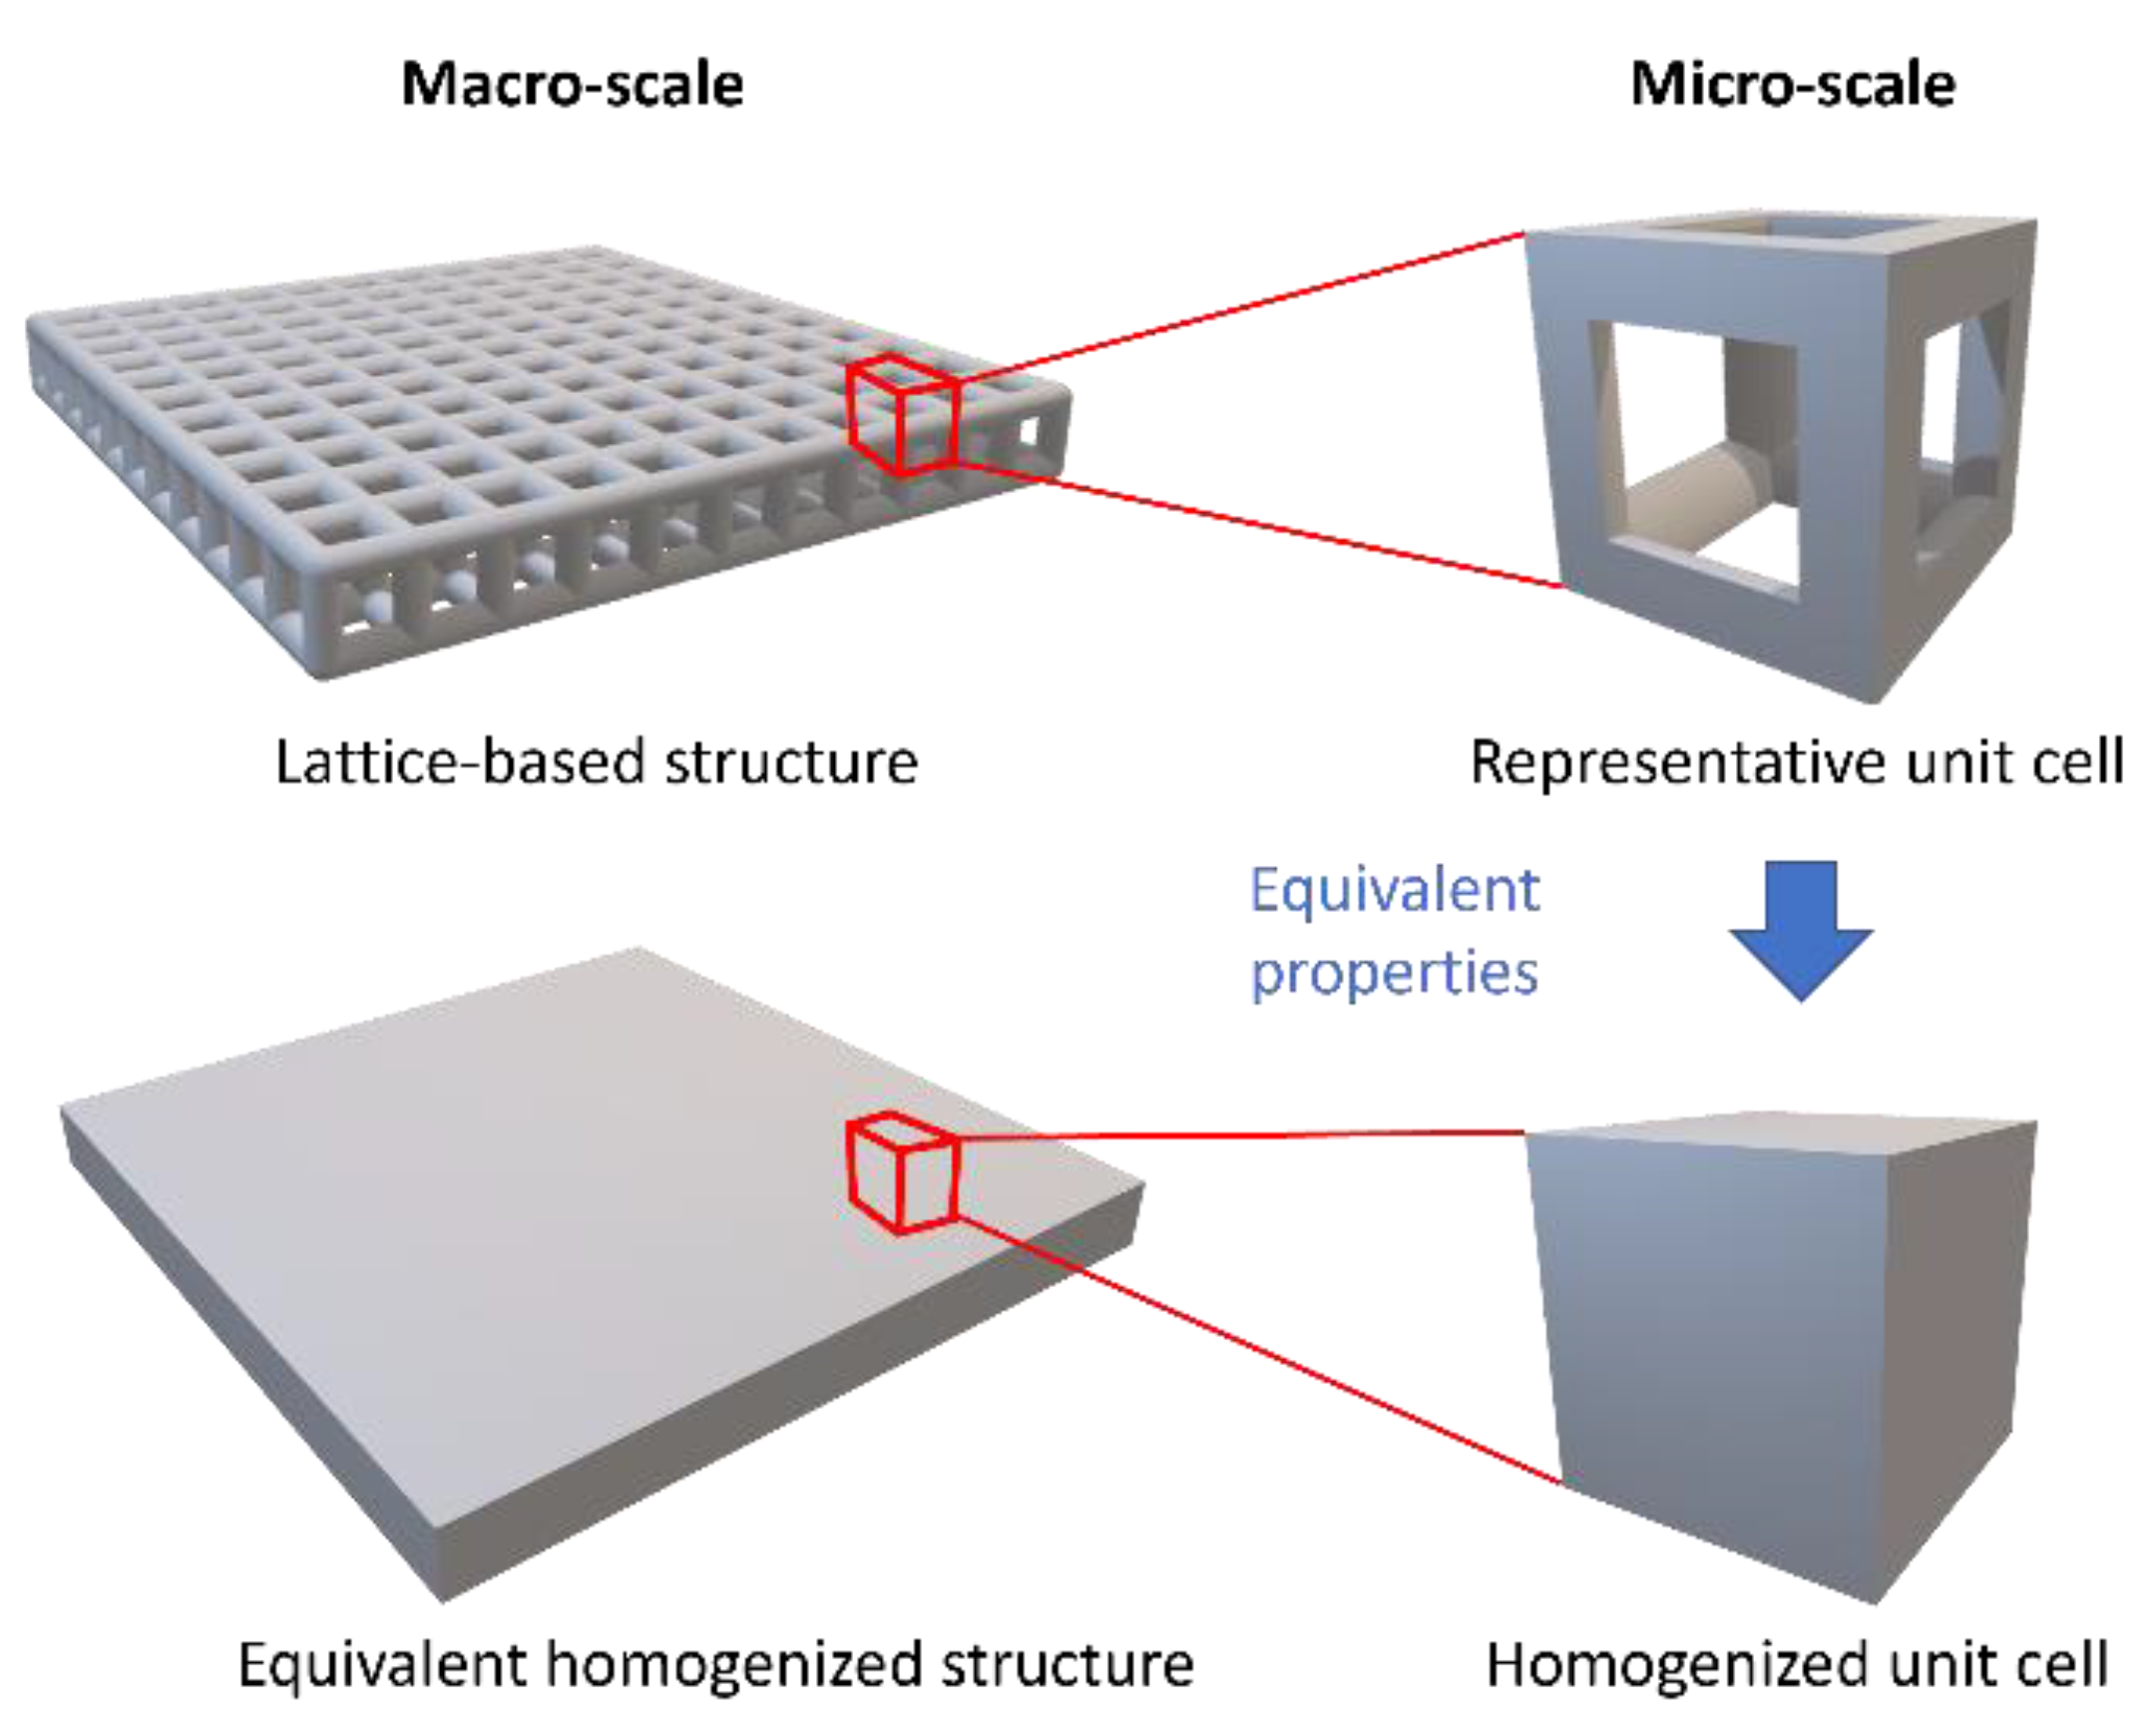 Figure 1. A concept of computational homogenization for the lattice structure. Effective characteristics of a lattice structure constructed with periodic unit cells are evaluated based on computational homogenizations with the representative unit cell. The obtained effective properties are used to predict macroscopic responses of the structure with a homogenized structural model.